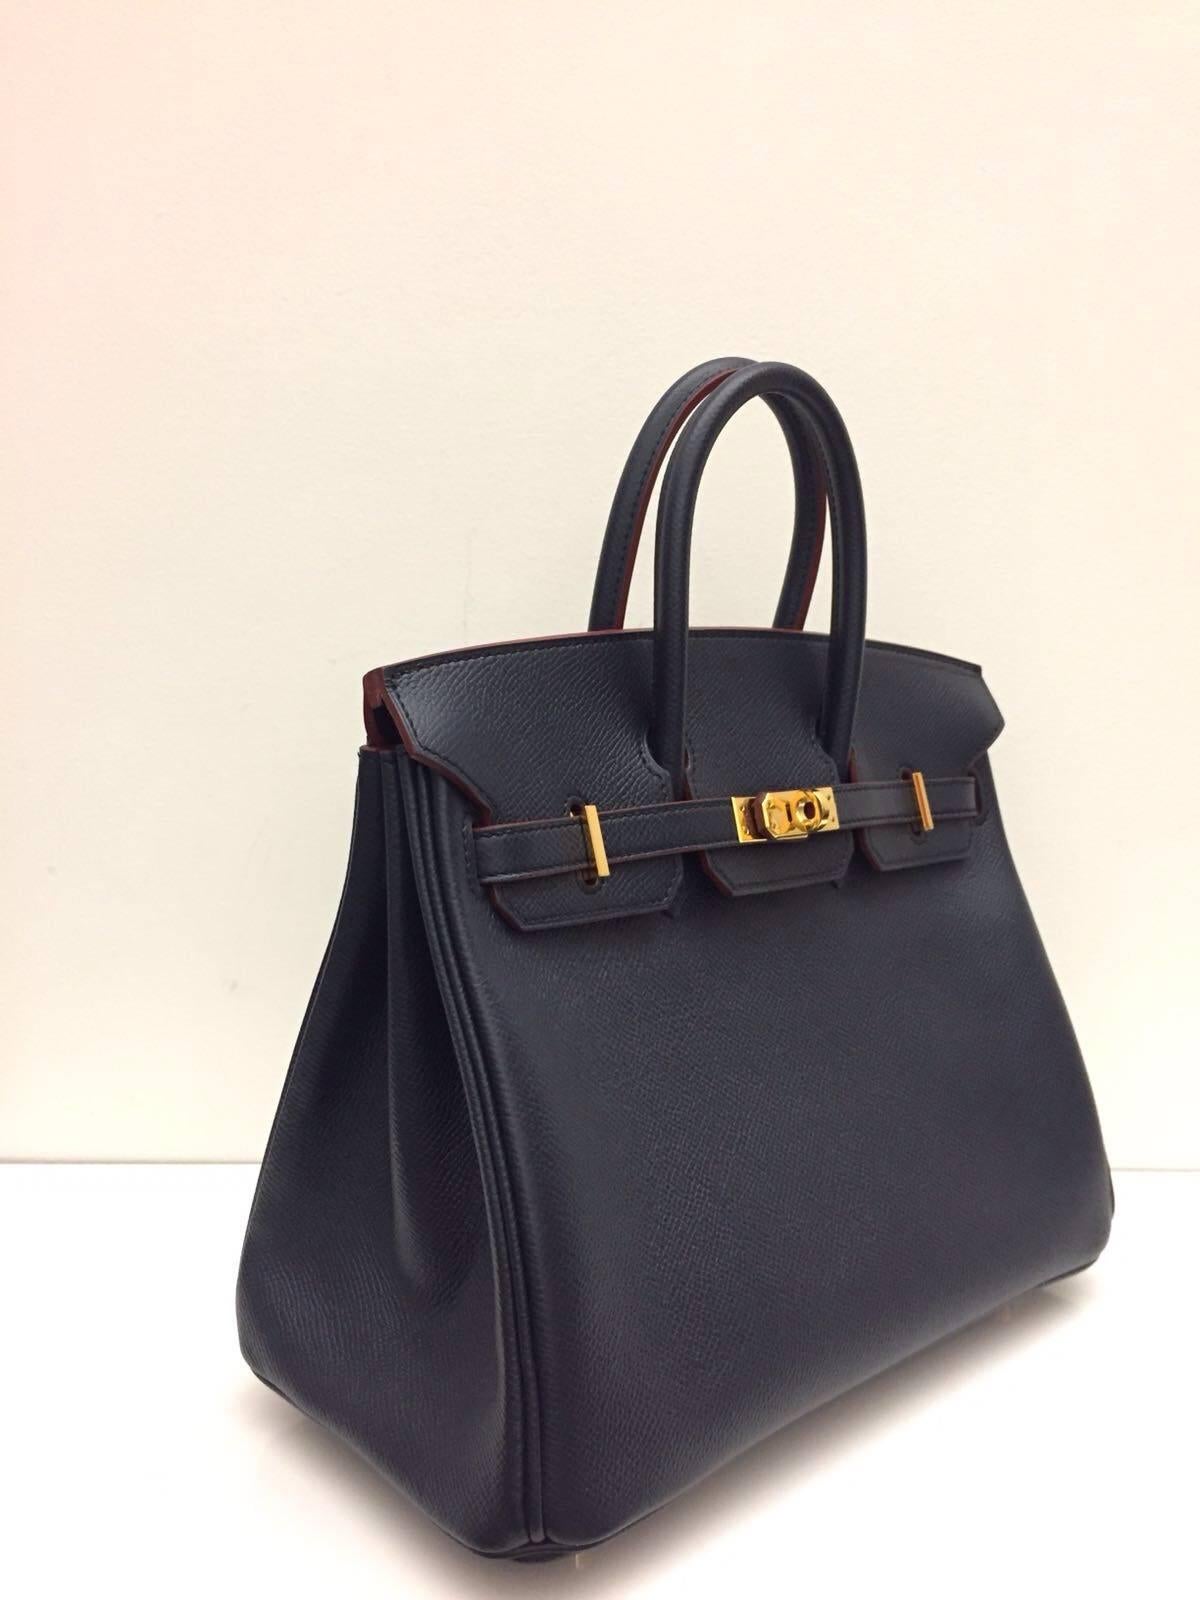 Hermes 
Birkin Size 25 
Epsom Leather 
Colour B;ue Indigo Red Contour
Gold Hardware
store fresh, comes with receipt and full set (dust bag, box...) 
Hydeparkfashion specializes in sourcing and delivering authentic luxury handbags, mainly Hermes, to